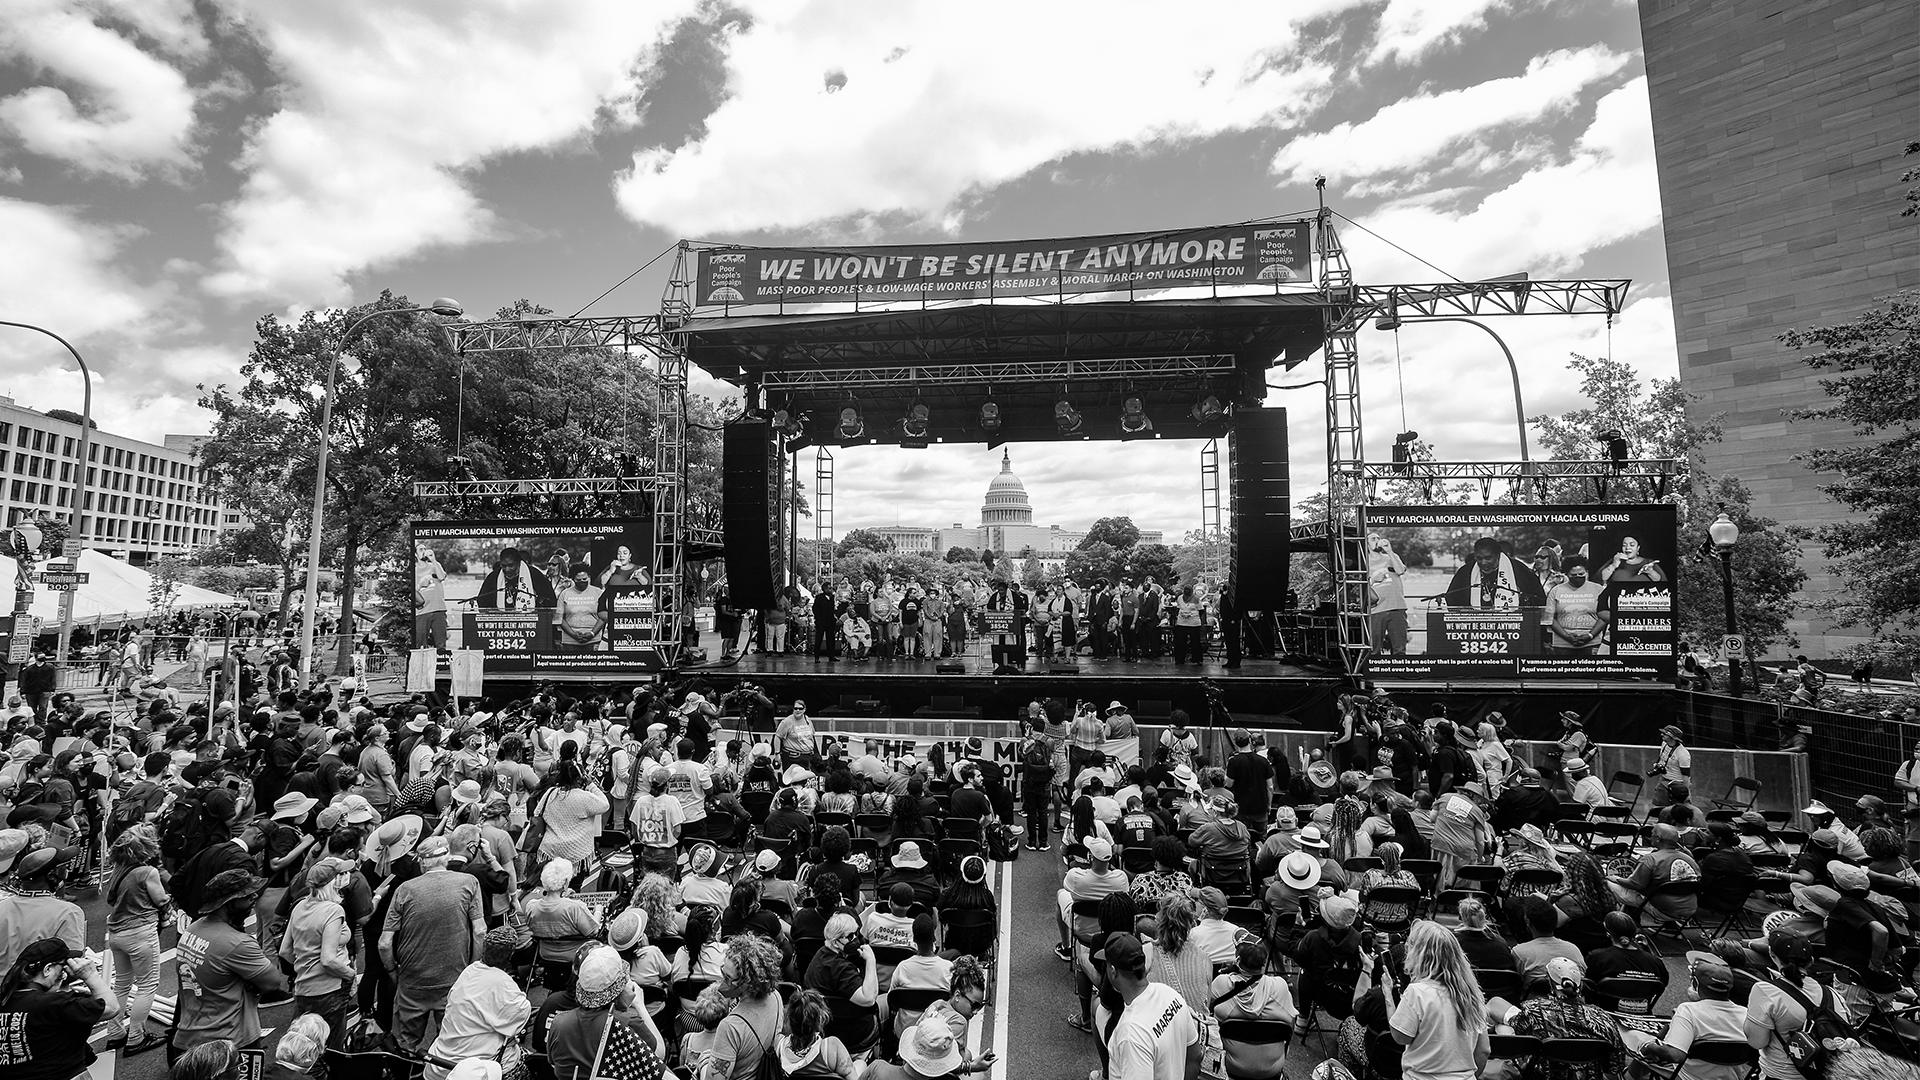 Picture by Steve Pavey from The Mass Poor People’s and Low-Wage Workers’ Assembly and Moral March on Washington and to the Polls . There are thousands of activists looking towards a stage with the Moral Justice Choir. The State Capital Building is in the background.